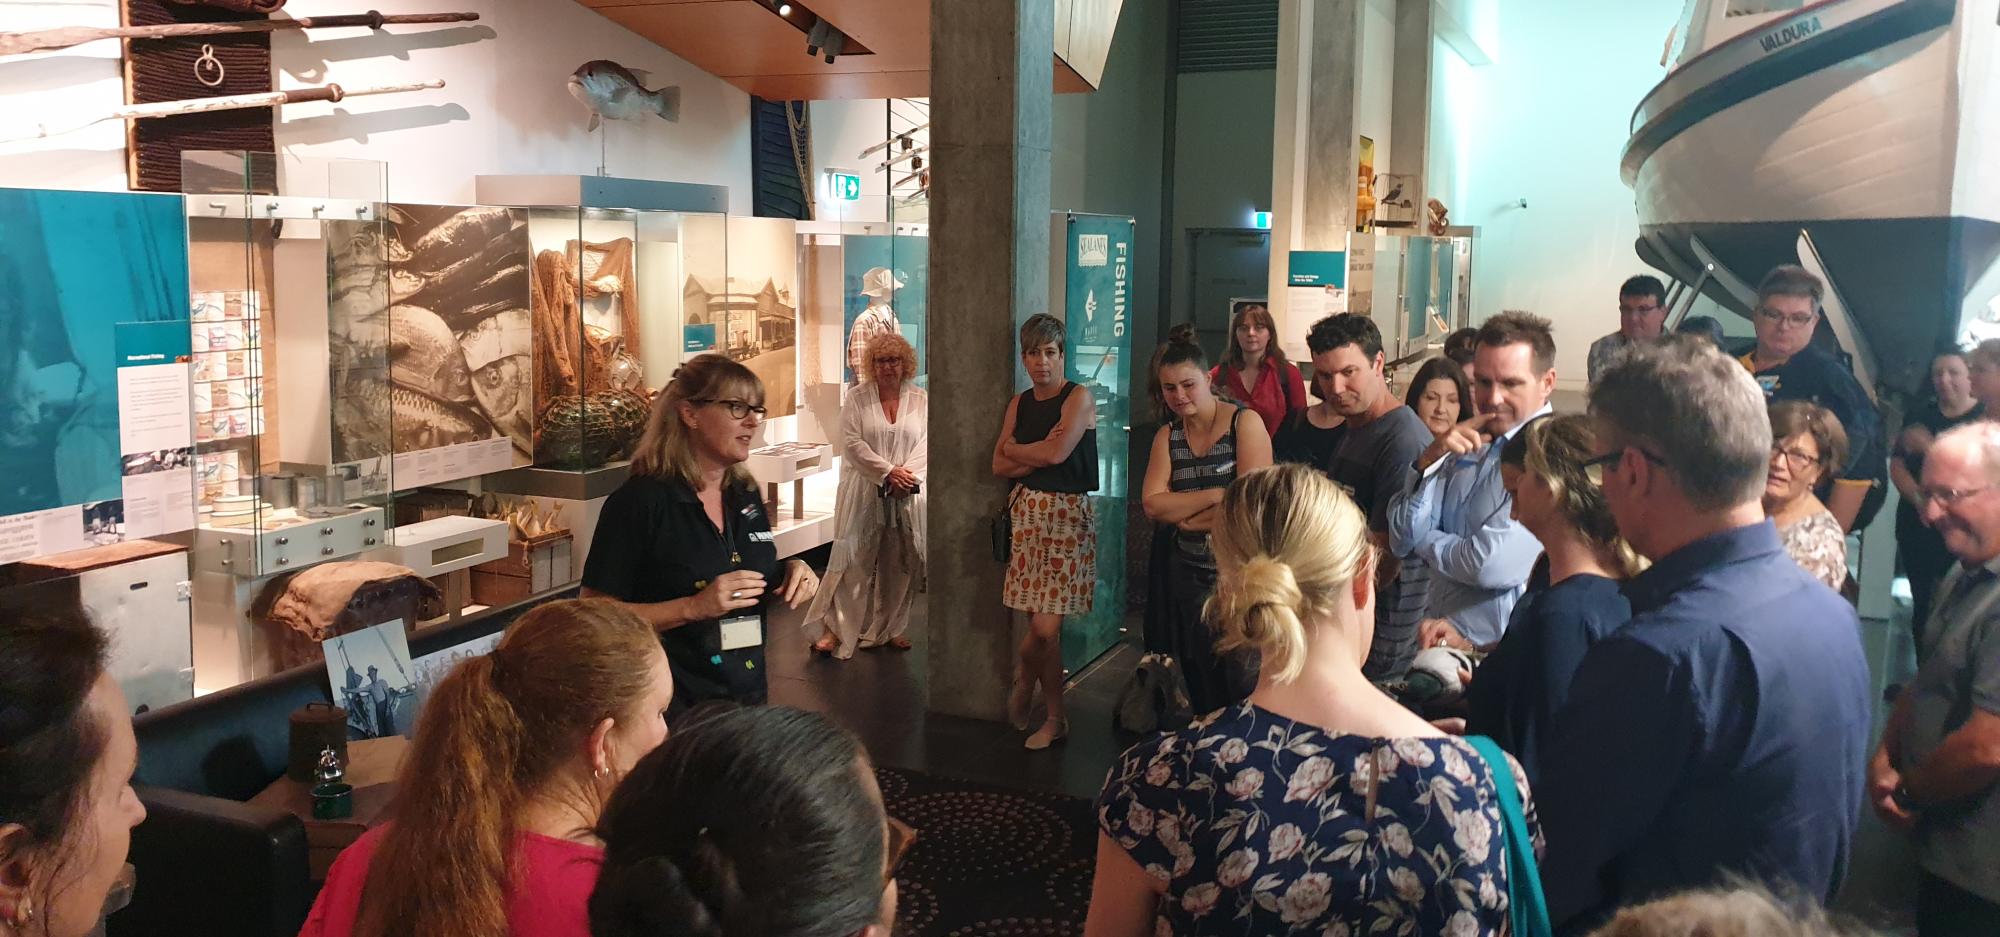 A group of teachers stand around a facilitator, who is giving a presentation in front of some showcases in a museum exhibition